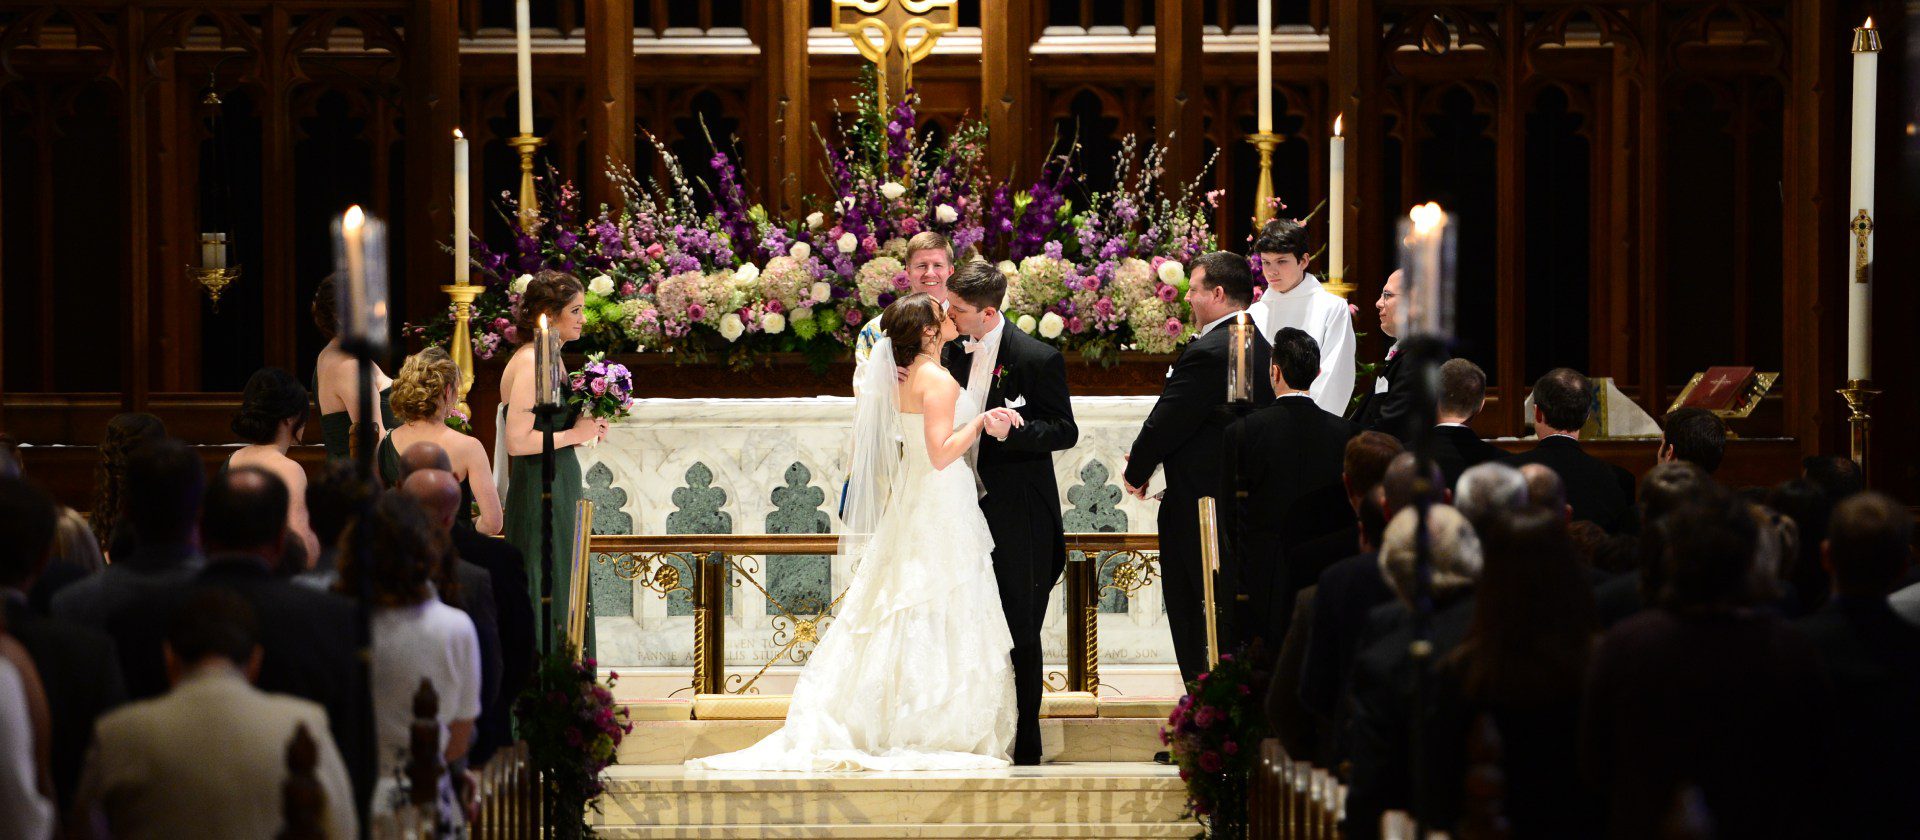 A bride and groom are kissing in front of the altar.